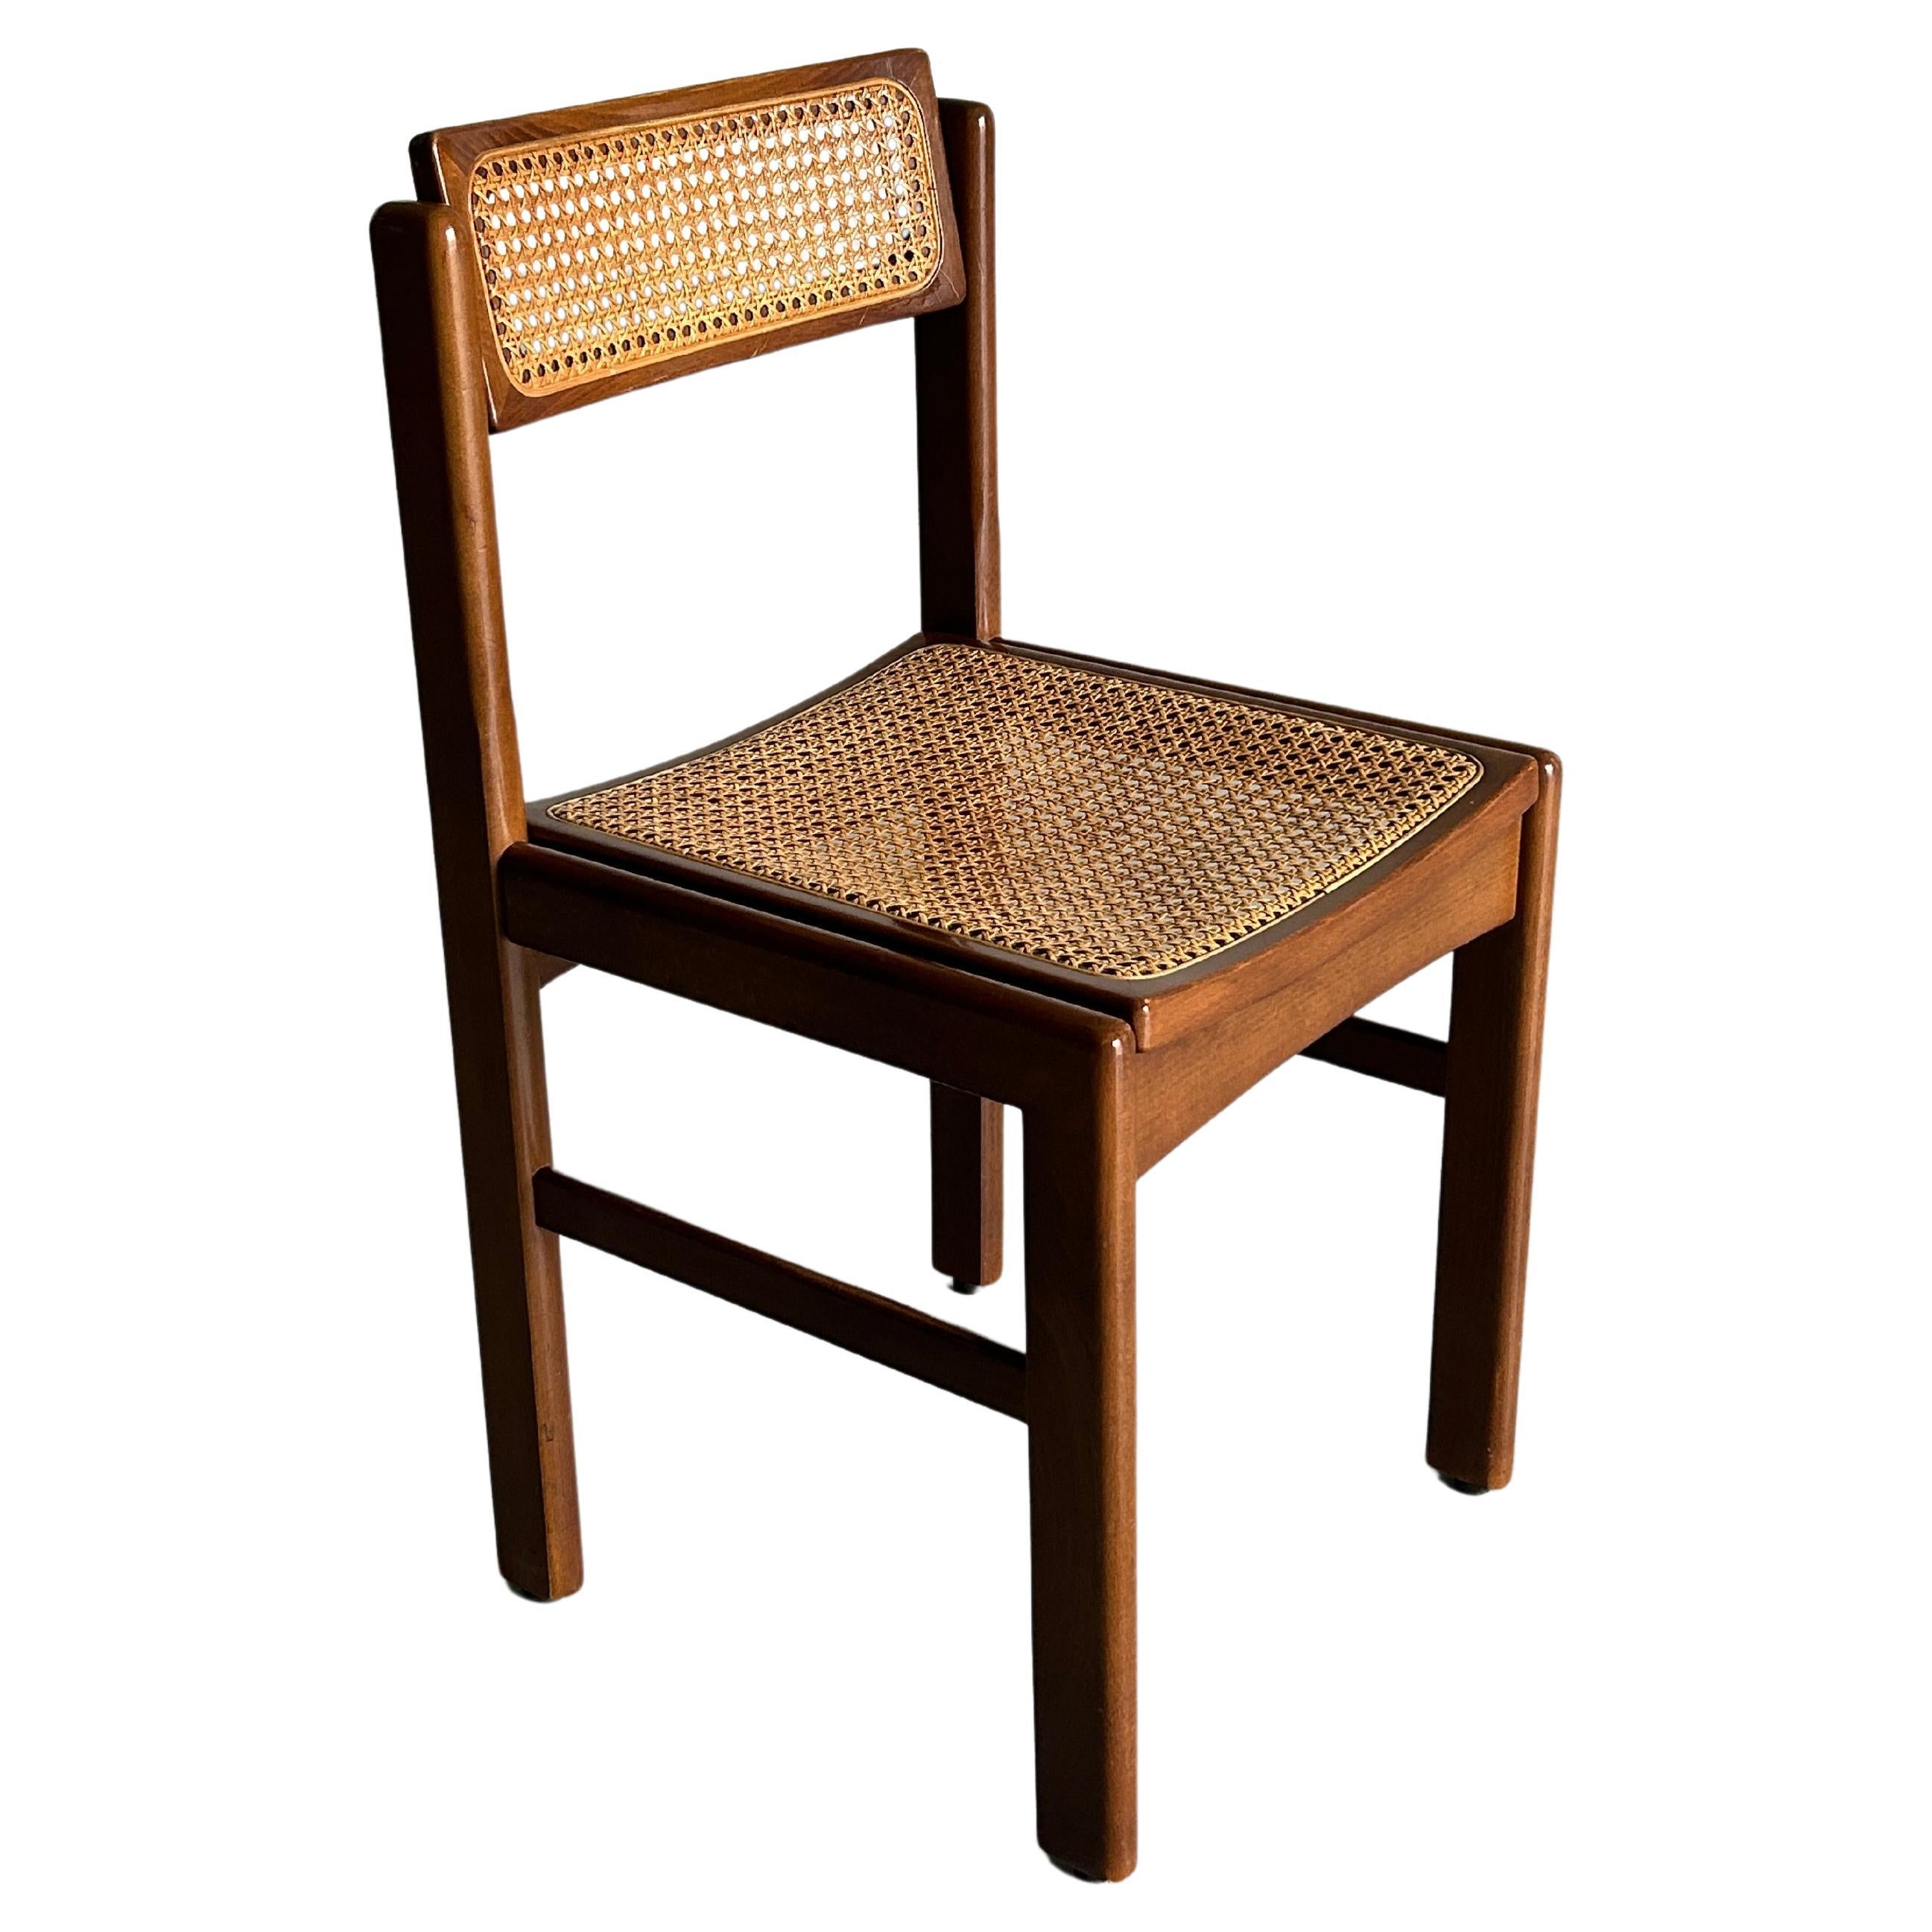 Vintage Mid-Century Stained Beechwood and Wicker Cane Dining Chair, 1960s Italy